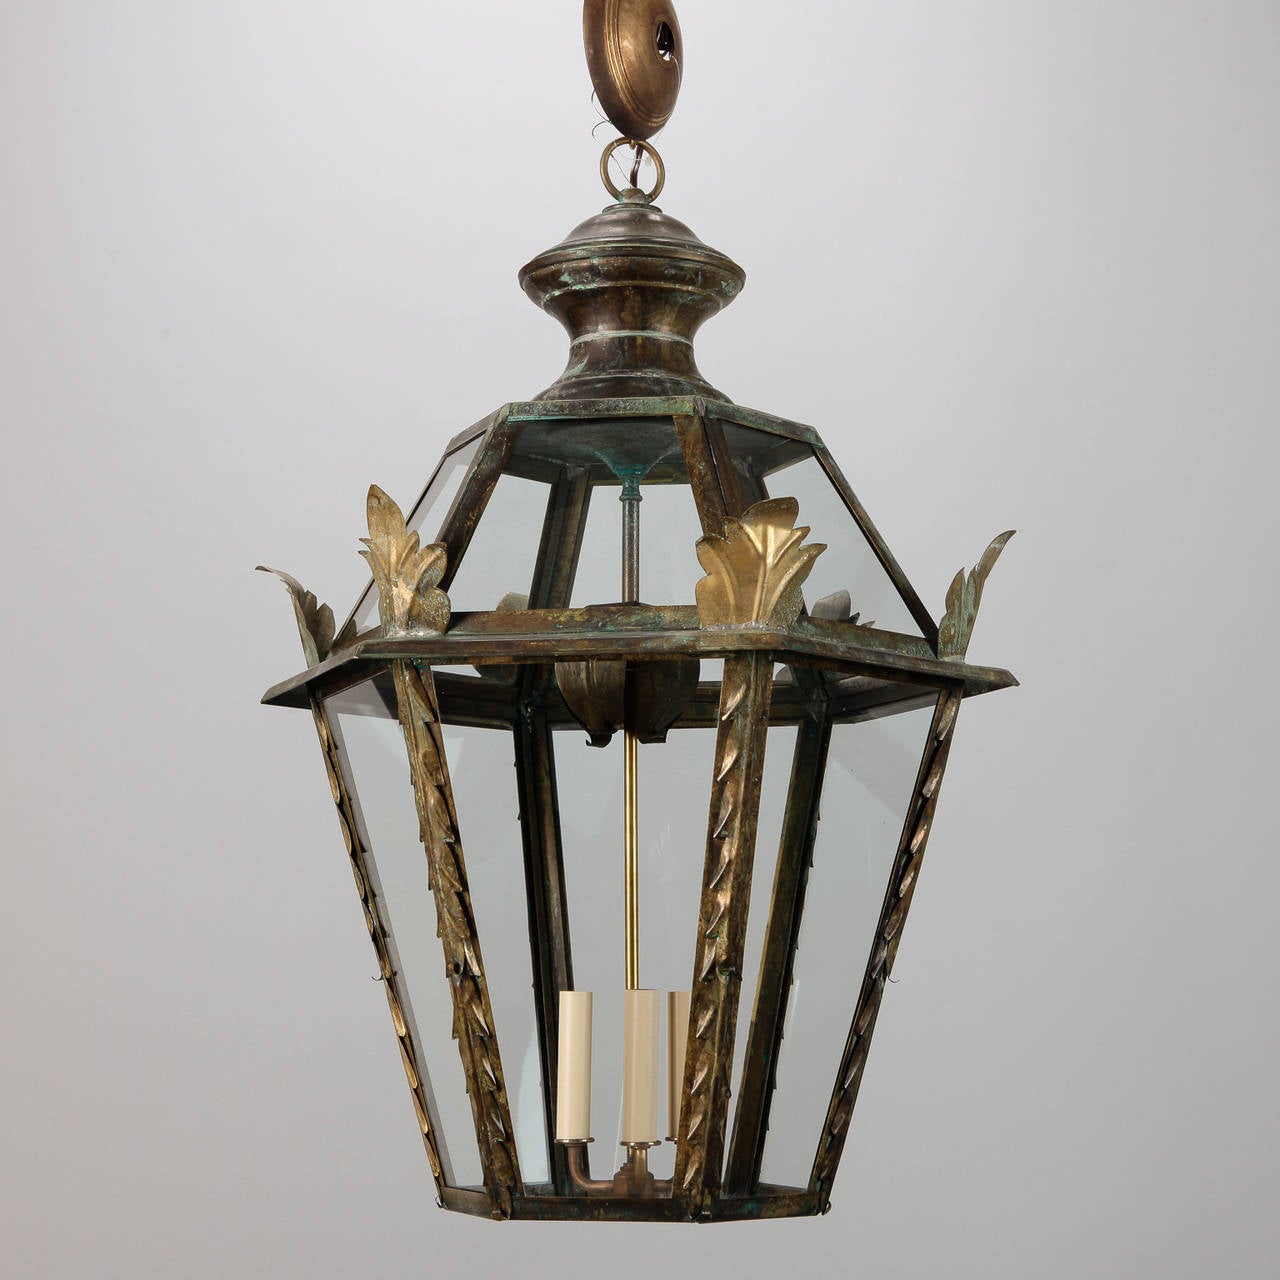 Circa 1980's large Italian dark brass lanterns with candle style lights, foliate form side supports and clear glass panels. New wiring for US electrical standards.